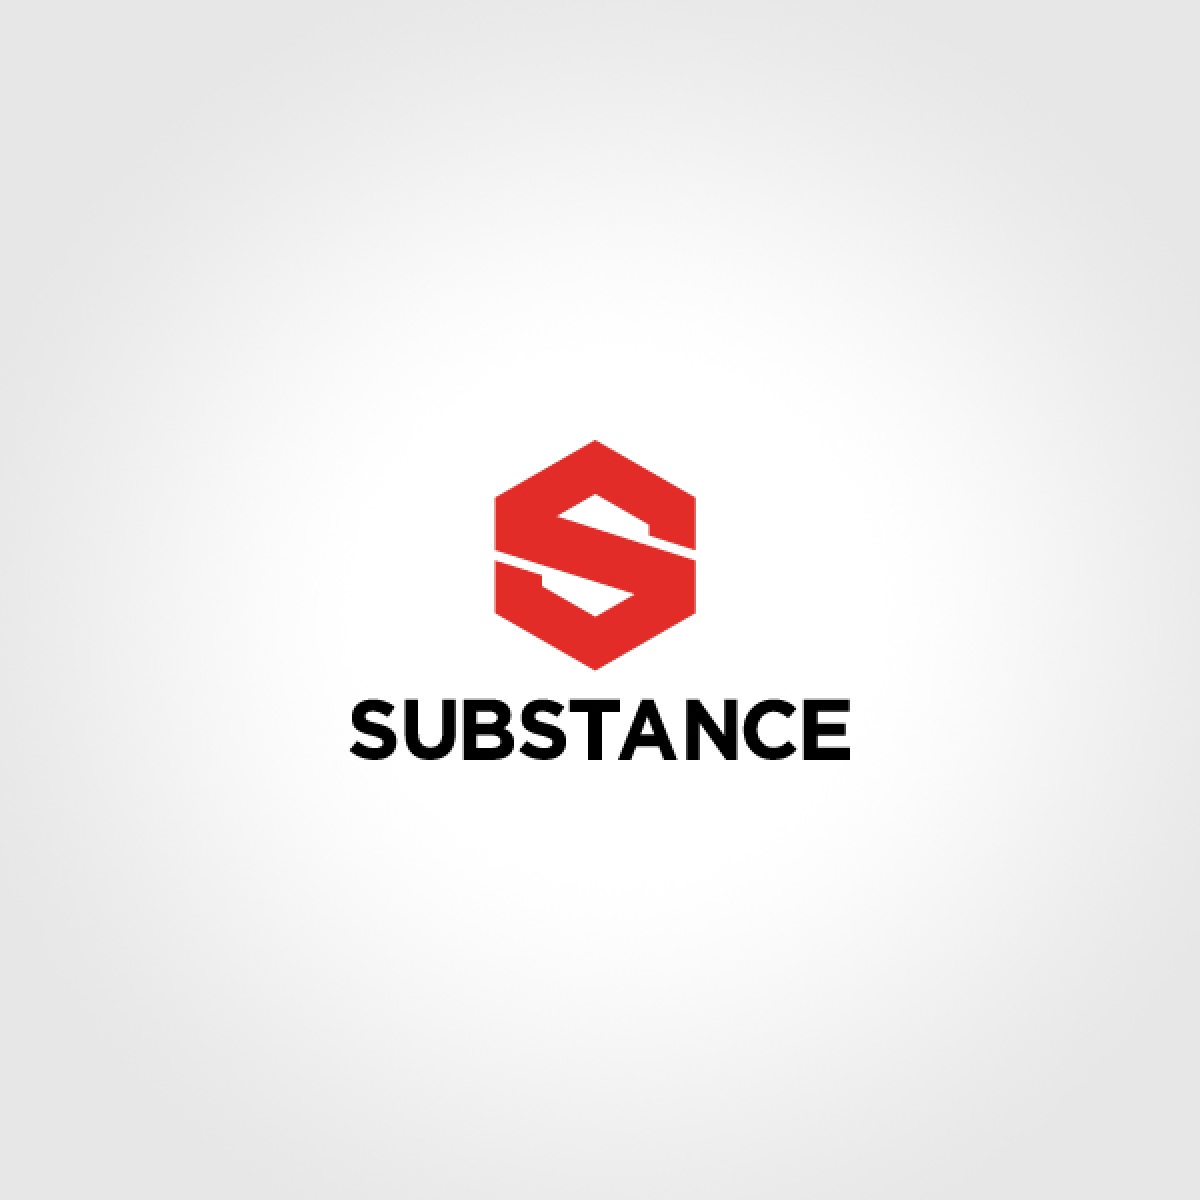 Substance 3D Collection